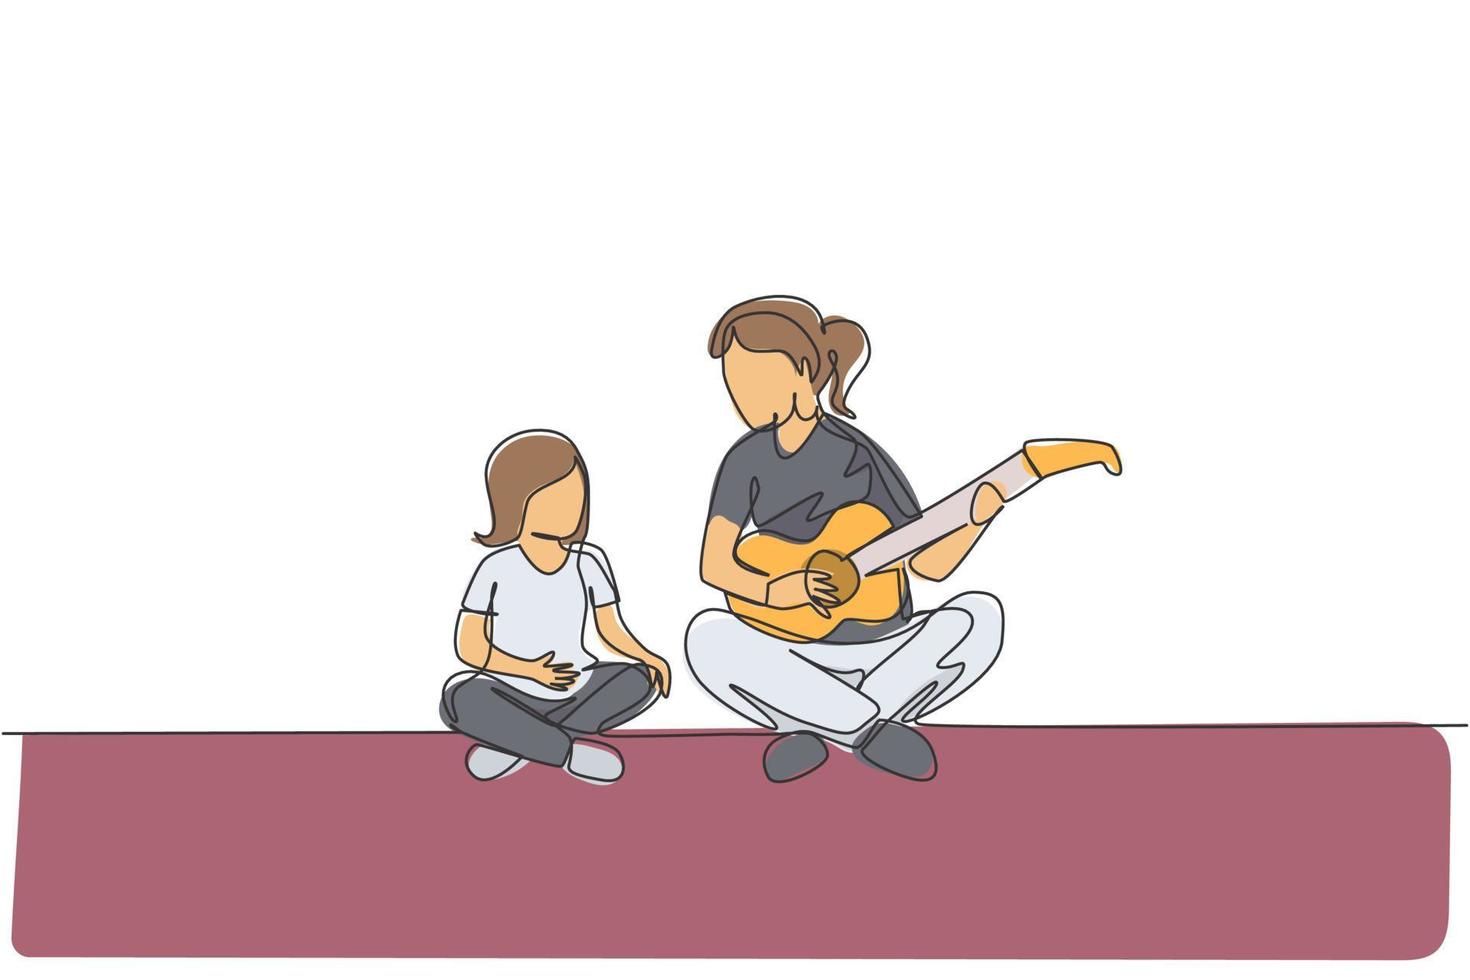 One single line drawing of young mom playing guitar and happy singing together with her son at home vector graphic illustration. Happy family bonding concept. Modern continuous line draw design